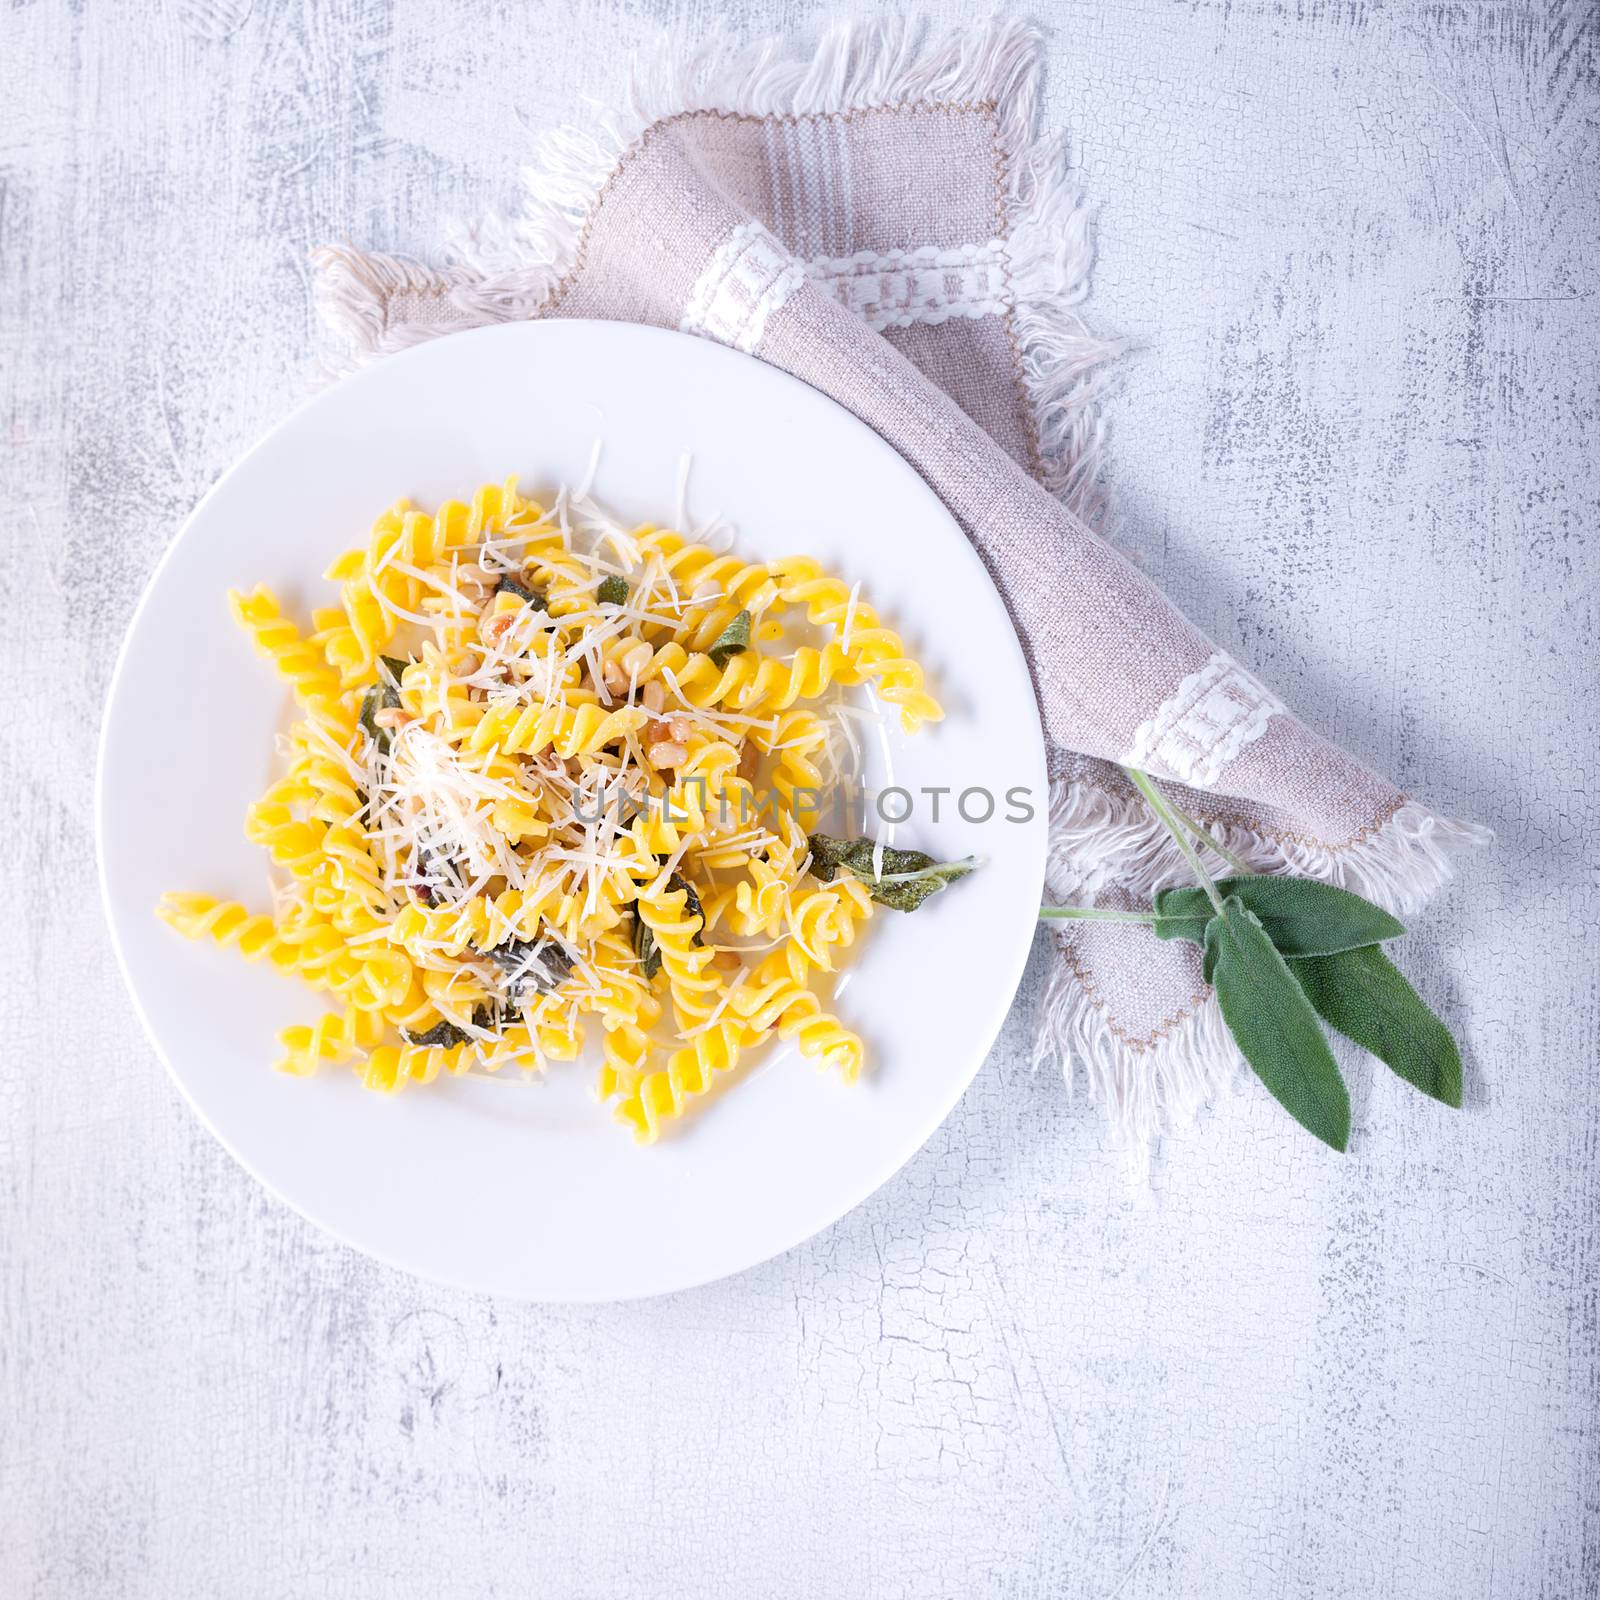 Fusilli pasta with sage and pine nuts. Gluten free. Flour from rice and corn flour